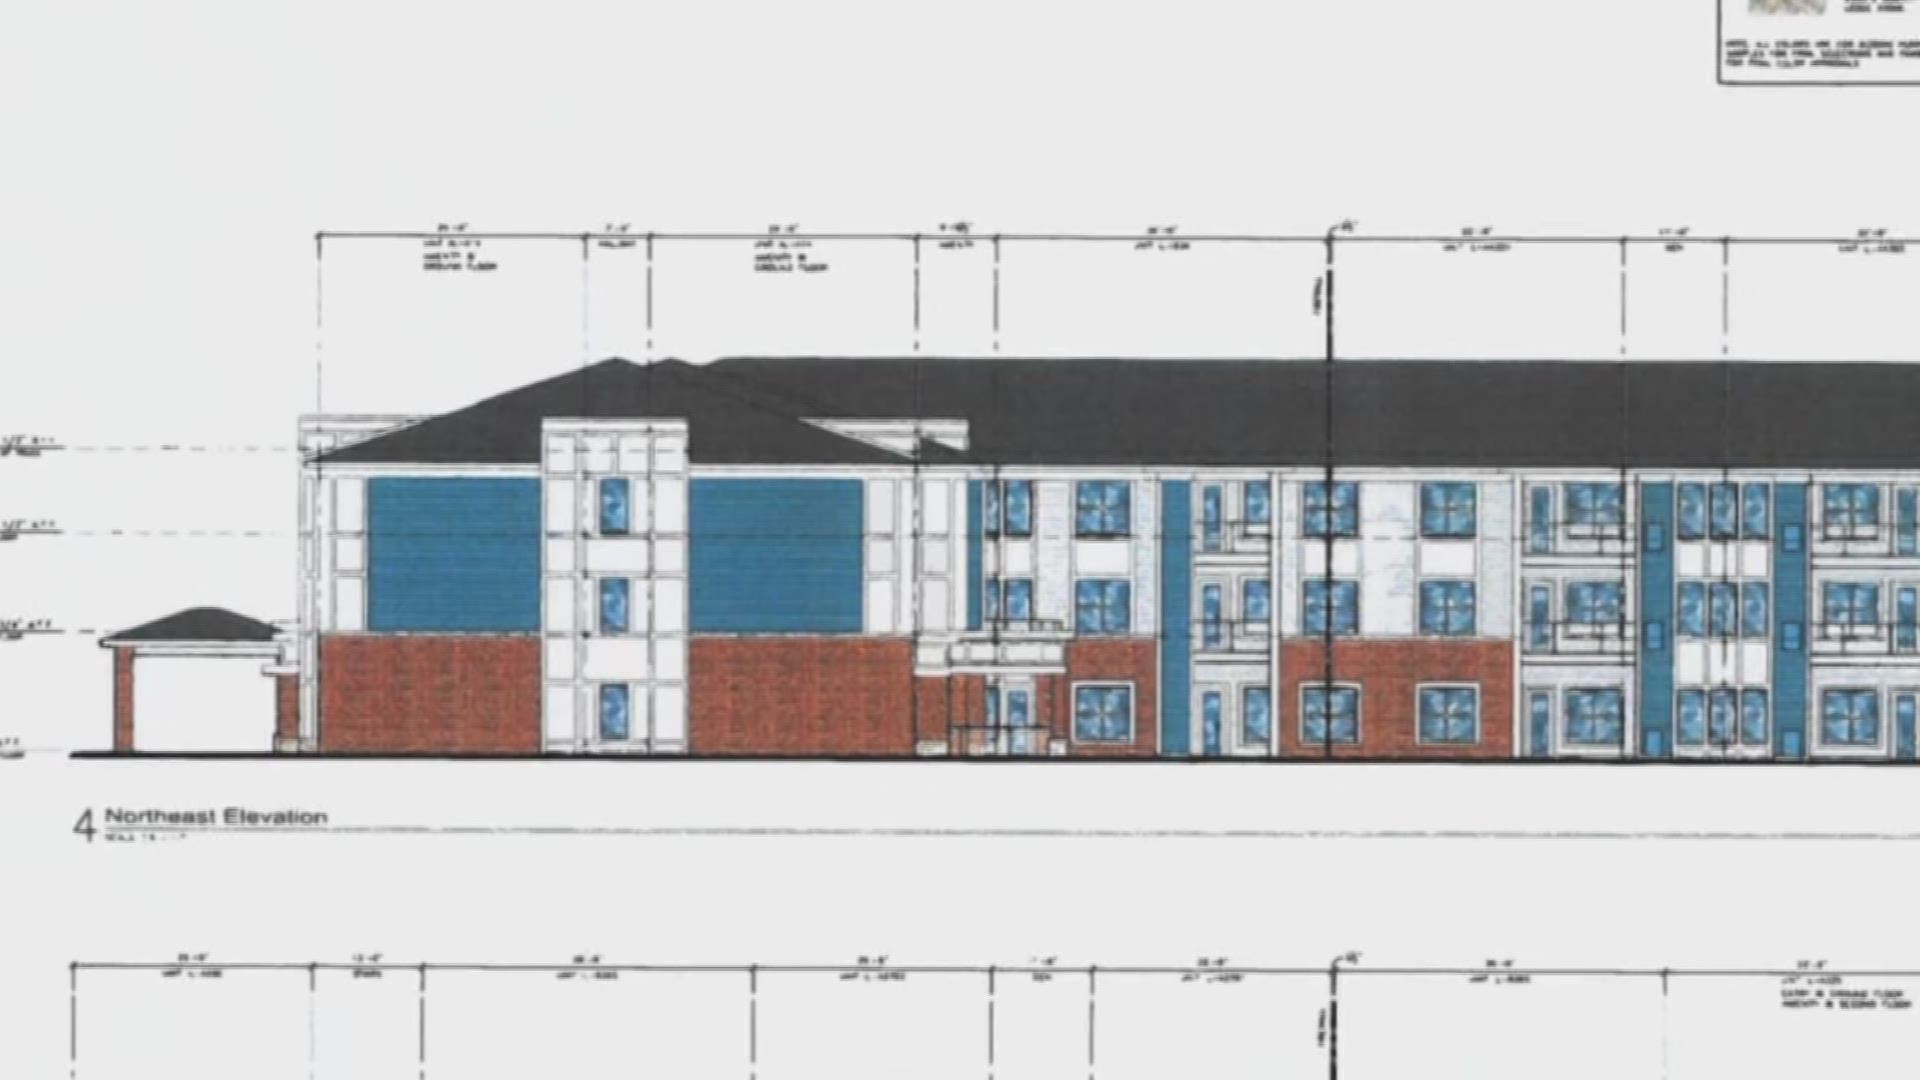 Neighbors in Chesapeake spoke out against a new senior living facility in Chesapeake on Battlefield Boulevard, but city council approved it anyway.